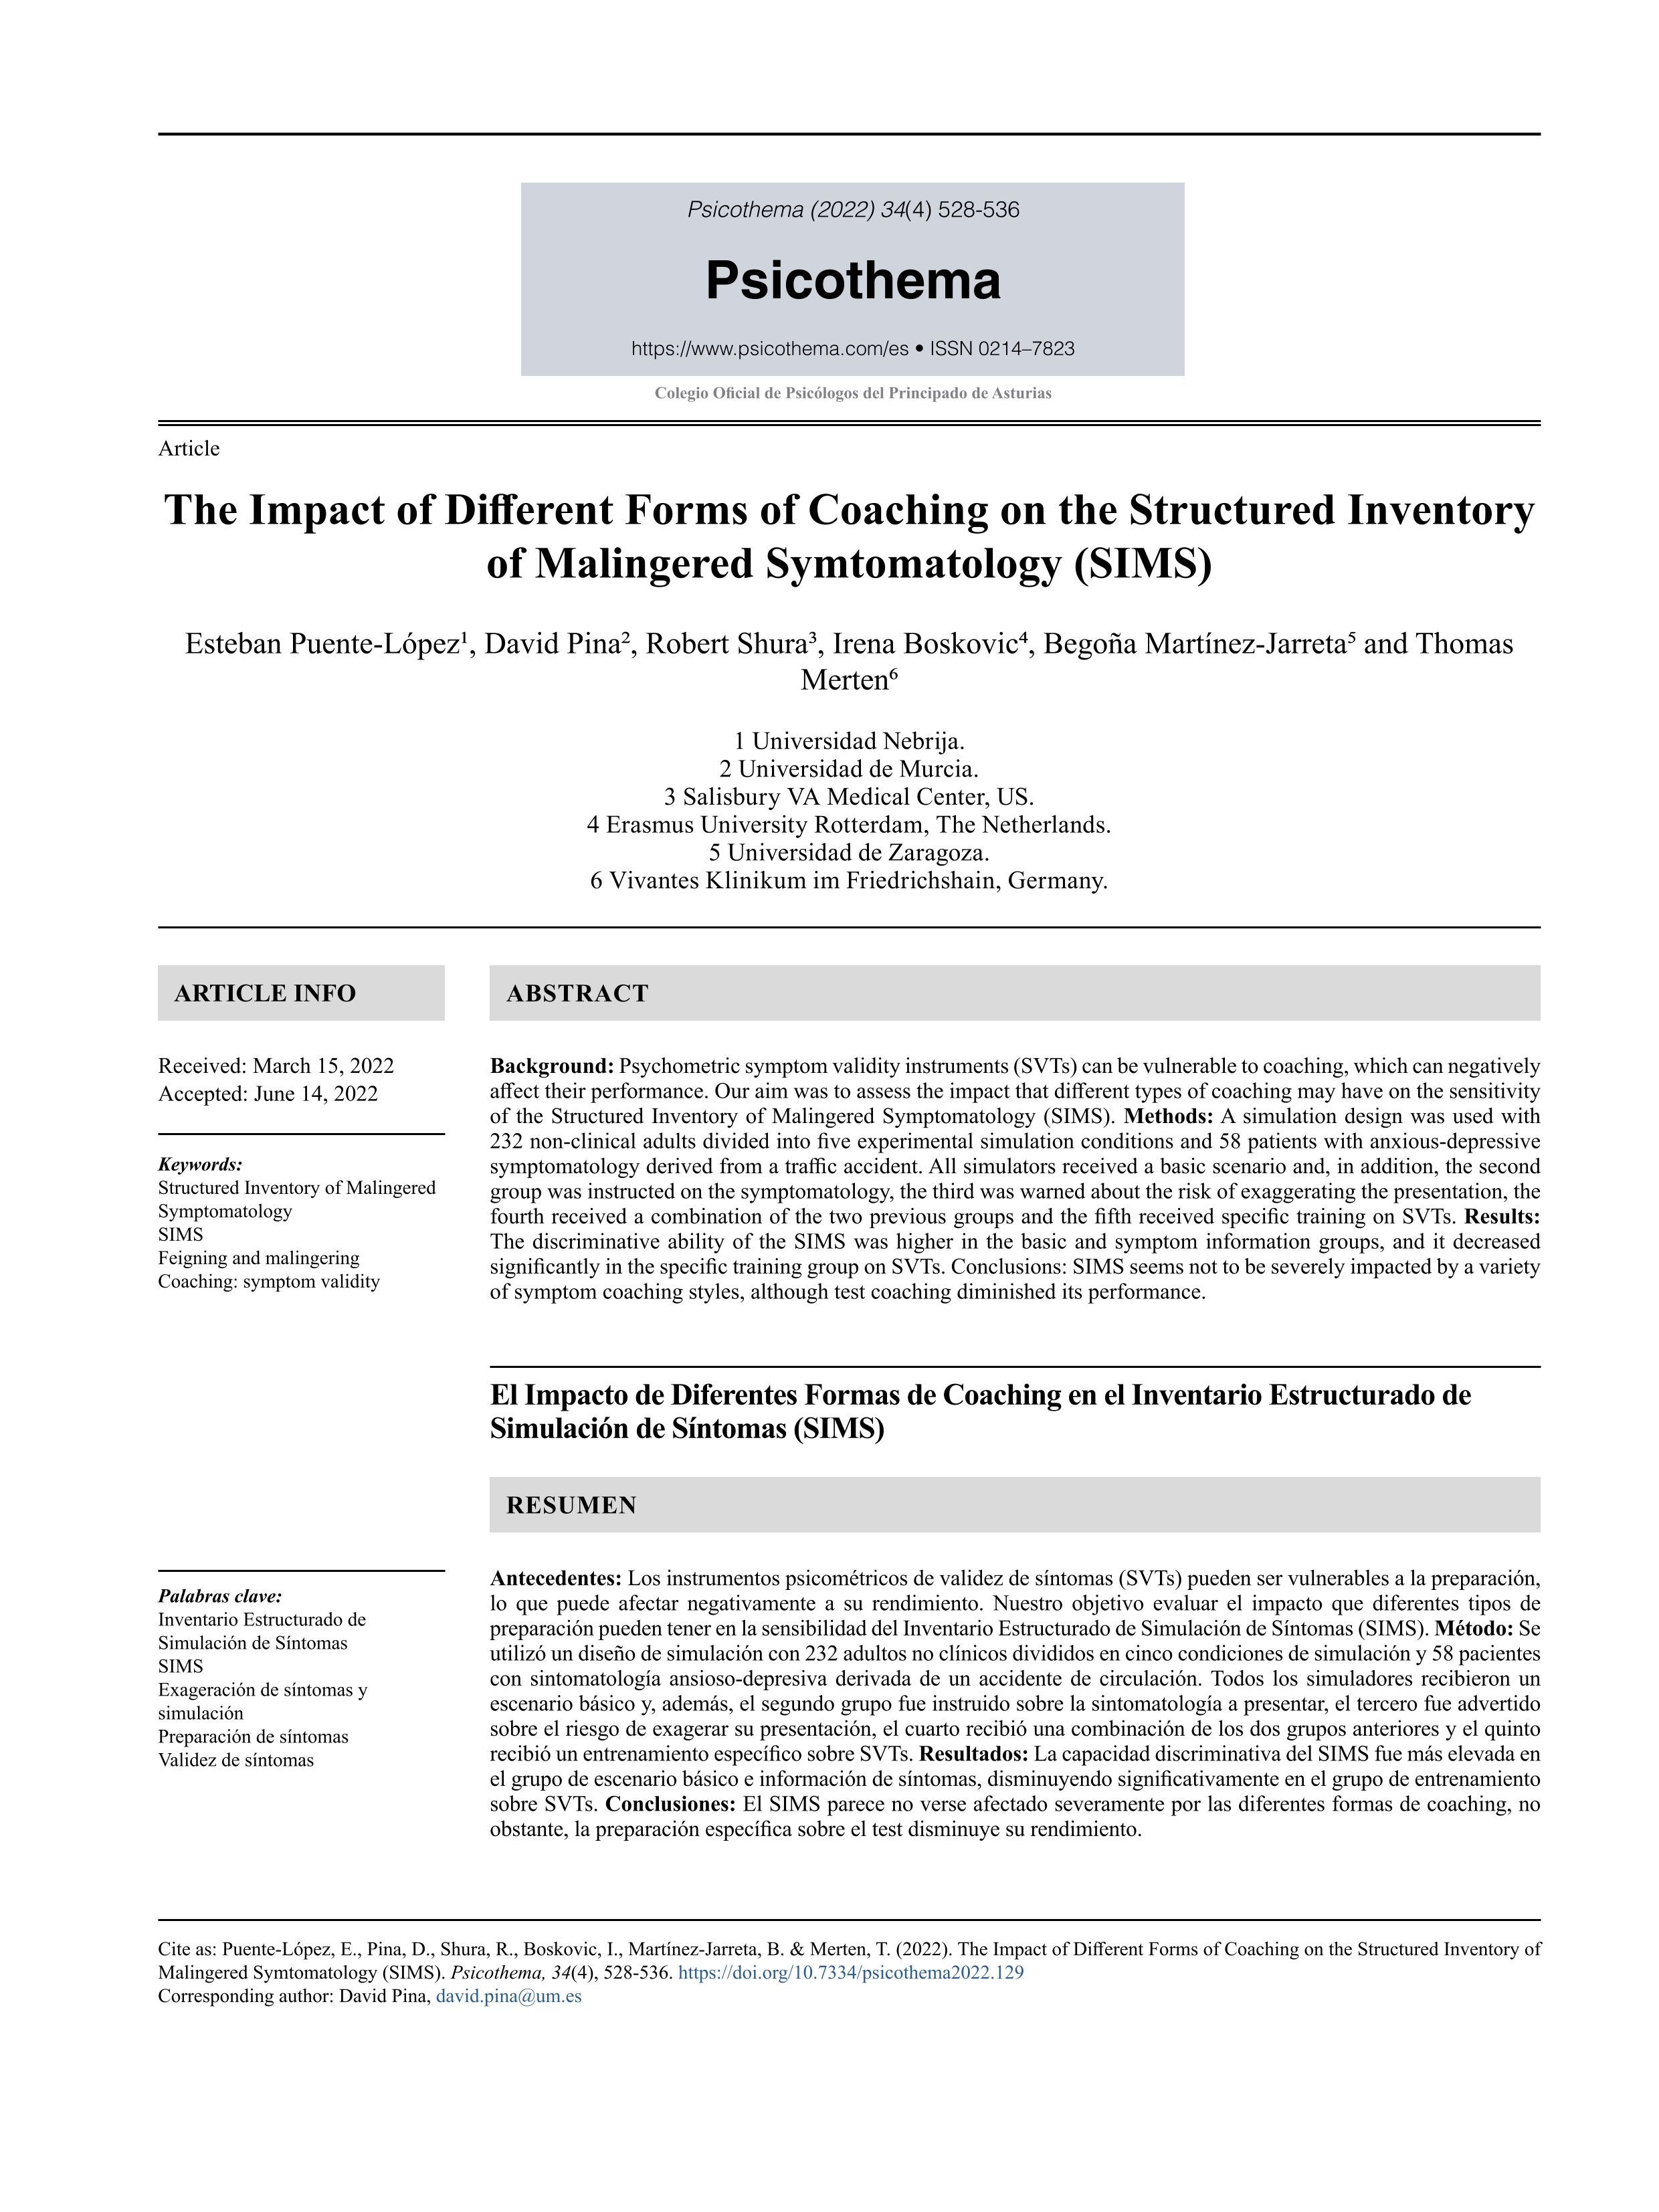 The impact of different forms of coaching on the structured inventory of malingered symtomatology (sims)